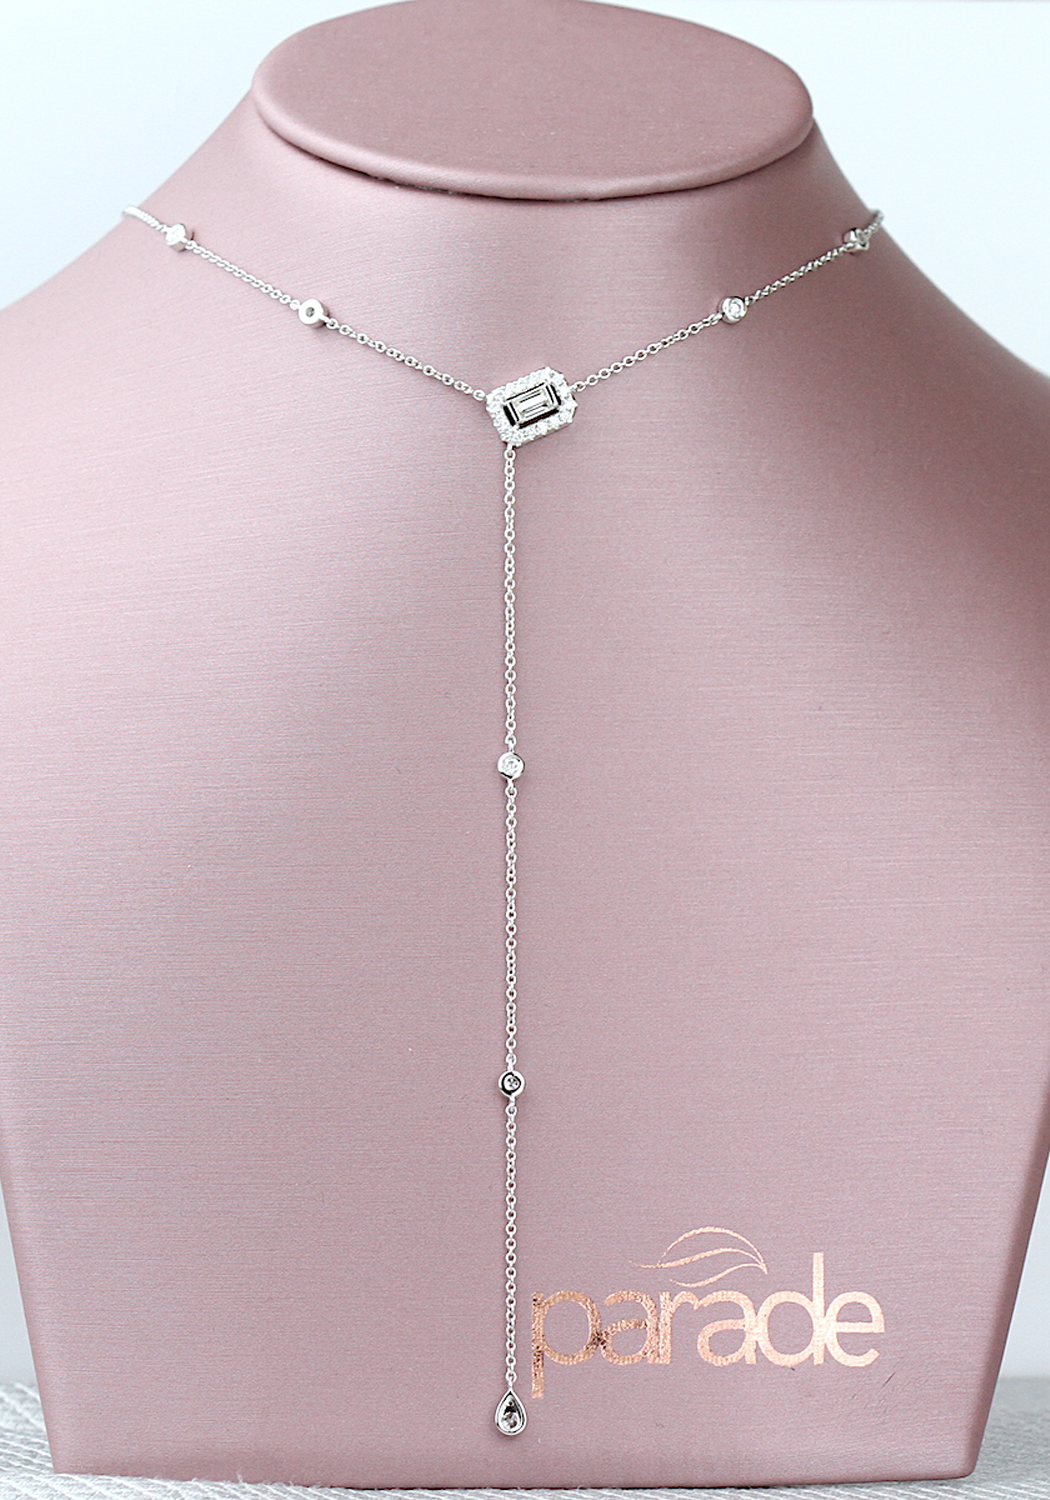 Parade Design 18K White Gold Diamond Lariat Necklace | Ref. N4440A2 | OsterJewelers.com